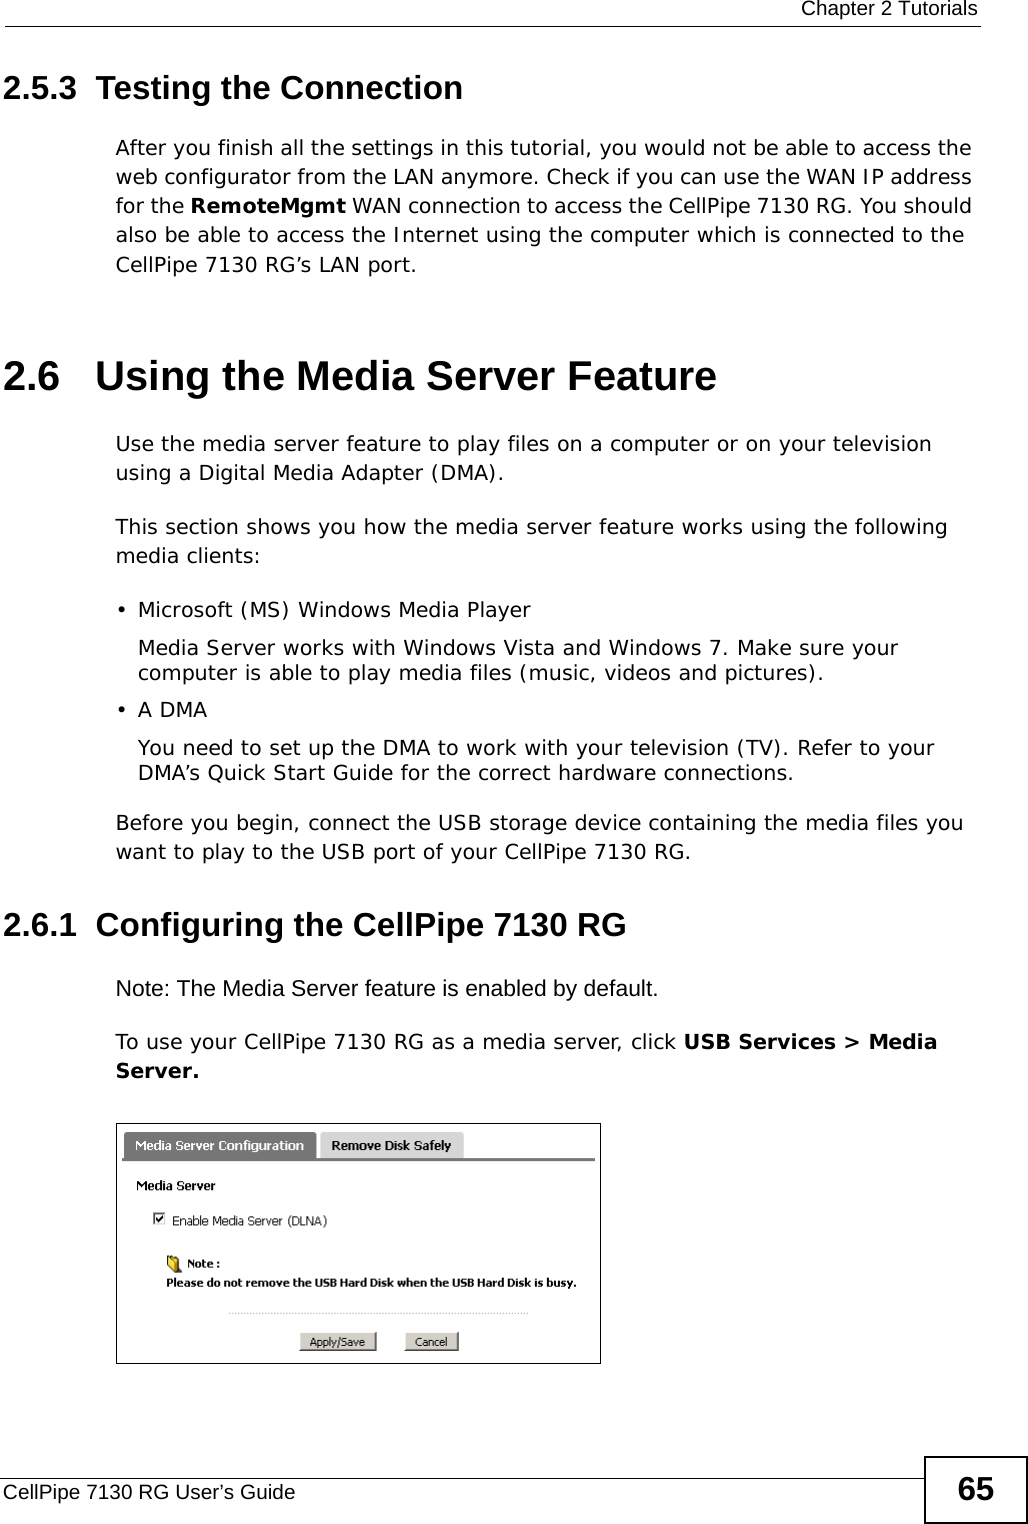  Chapter 2 TutorialsCellPipe 7130 RG User’s Guide 652.5.3  Testing the ConnectionAfter you finish all the settings in this tutorial, you would not be able to access the web configurator from the LAN anymore. Check if you can use the WAN IP address for the RemoteMgmt WAN connection to access the CellPipe 7130 RG. You should also be able to access the Internet using the computer which is connected to the CellPipe 7130 RG’s LAN port.2.6   Using the Media Server FeatureUse the media server feature to play files on a computer or on your television using a Digital Media Adapter (DMA).This section shows you how the media server feature works using the following media clients:  • Microsoft (MS) Windows Media Player Media Server works with Windows Vista and Windows 7. Make sure your computer is able to play media files (music, videos and pictures). •A DMAYou need to set up the DMA to work with your television (TV). Refer to your DMA’s Quick Start Guide for the correct hardware connections.  Before you begin, connect the USB storage device containing the media files you want to play to the USB port of your CellPipe 7130 RG.2.6.1  Configuring the CellPipe 7130 RGNote: The Media Server feature is enabled by default. To use your CellPipe 7130 RG as a media server, click USB Services &gt; Media Server.Tutorial: USB  Services &gt; Media Server